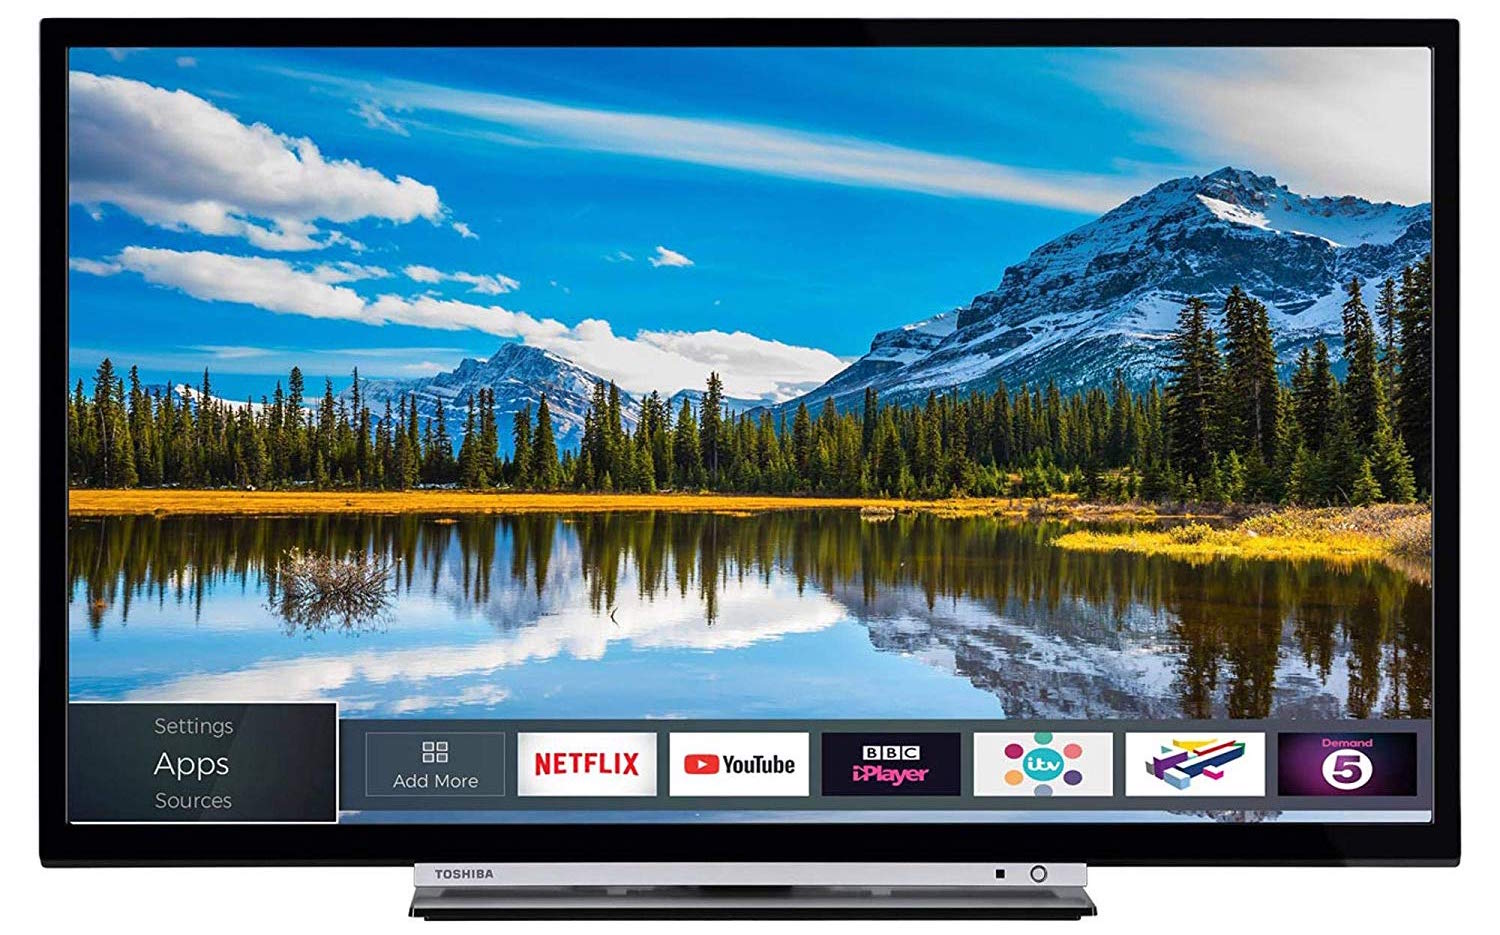 HD TV deal: save on best-selling Toshiba 32-inch TV